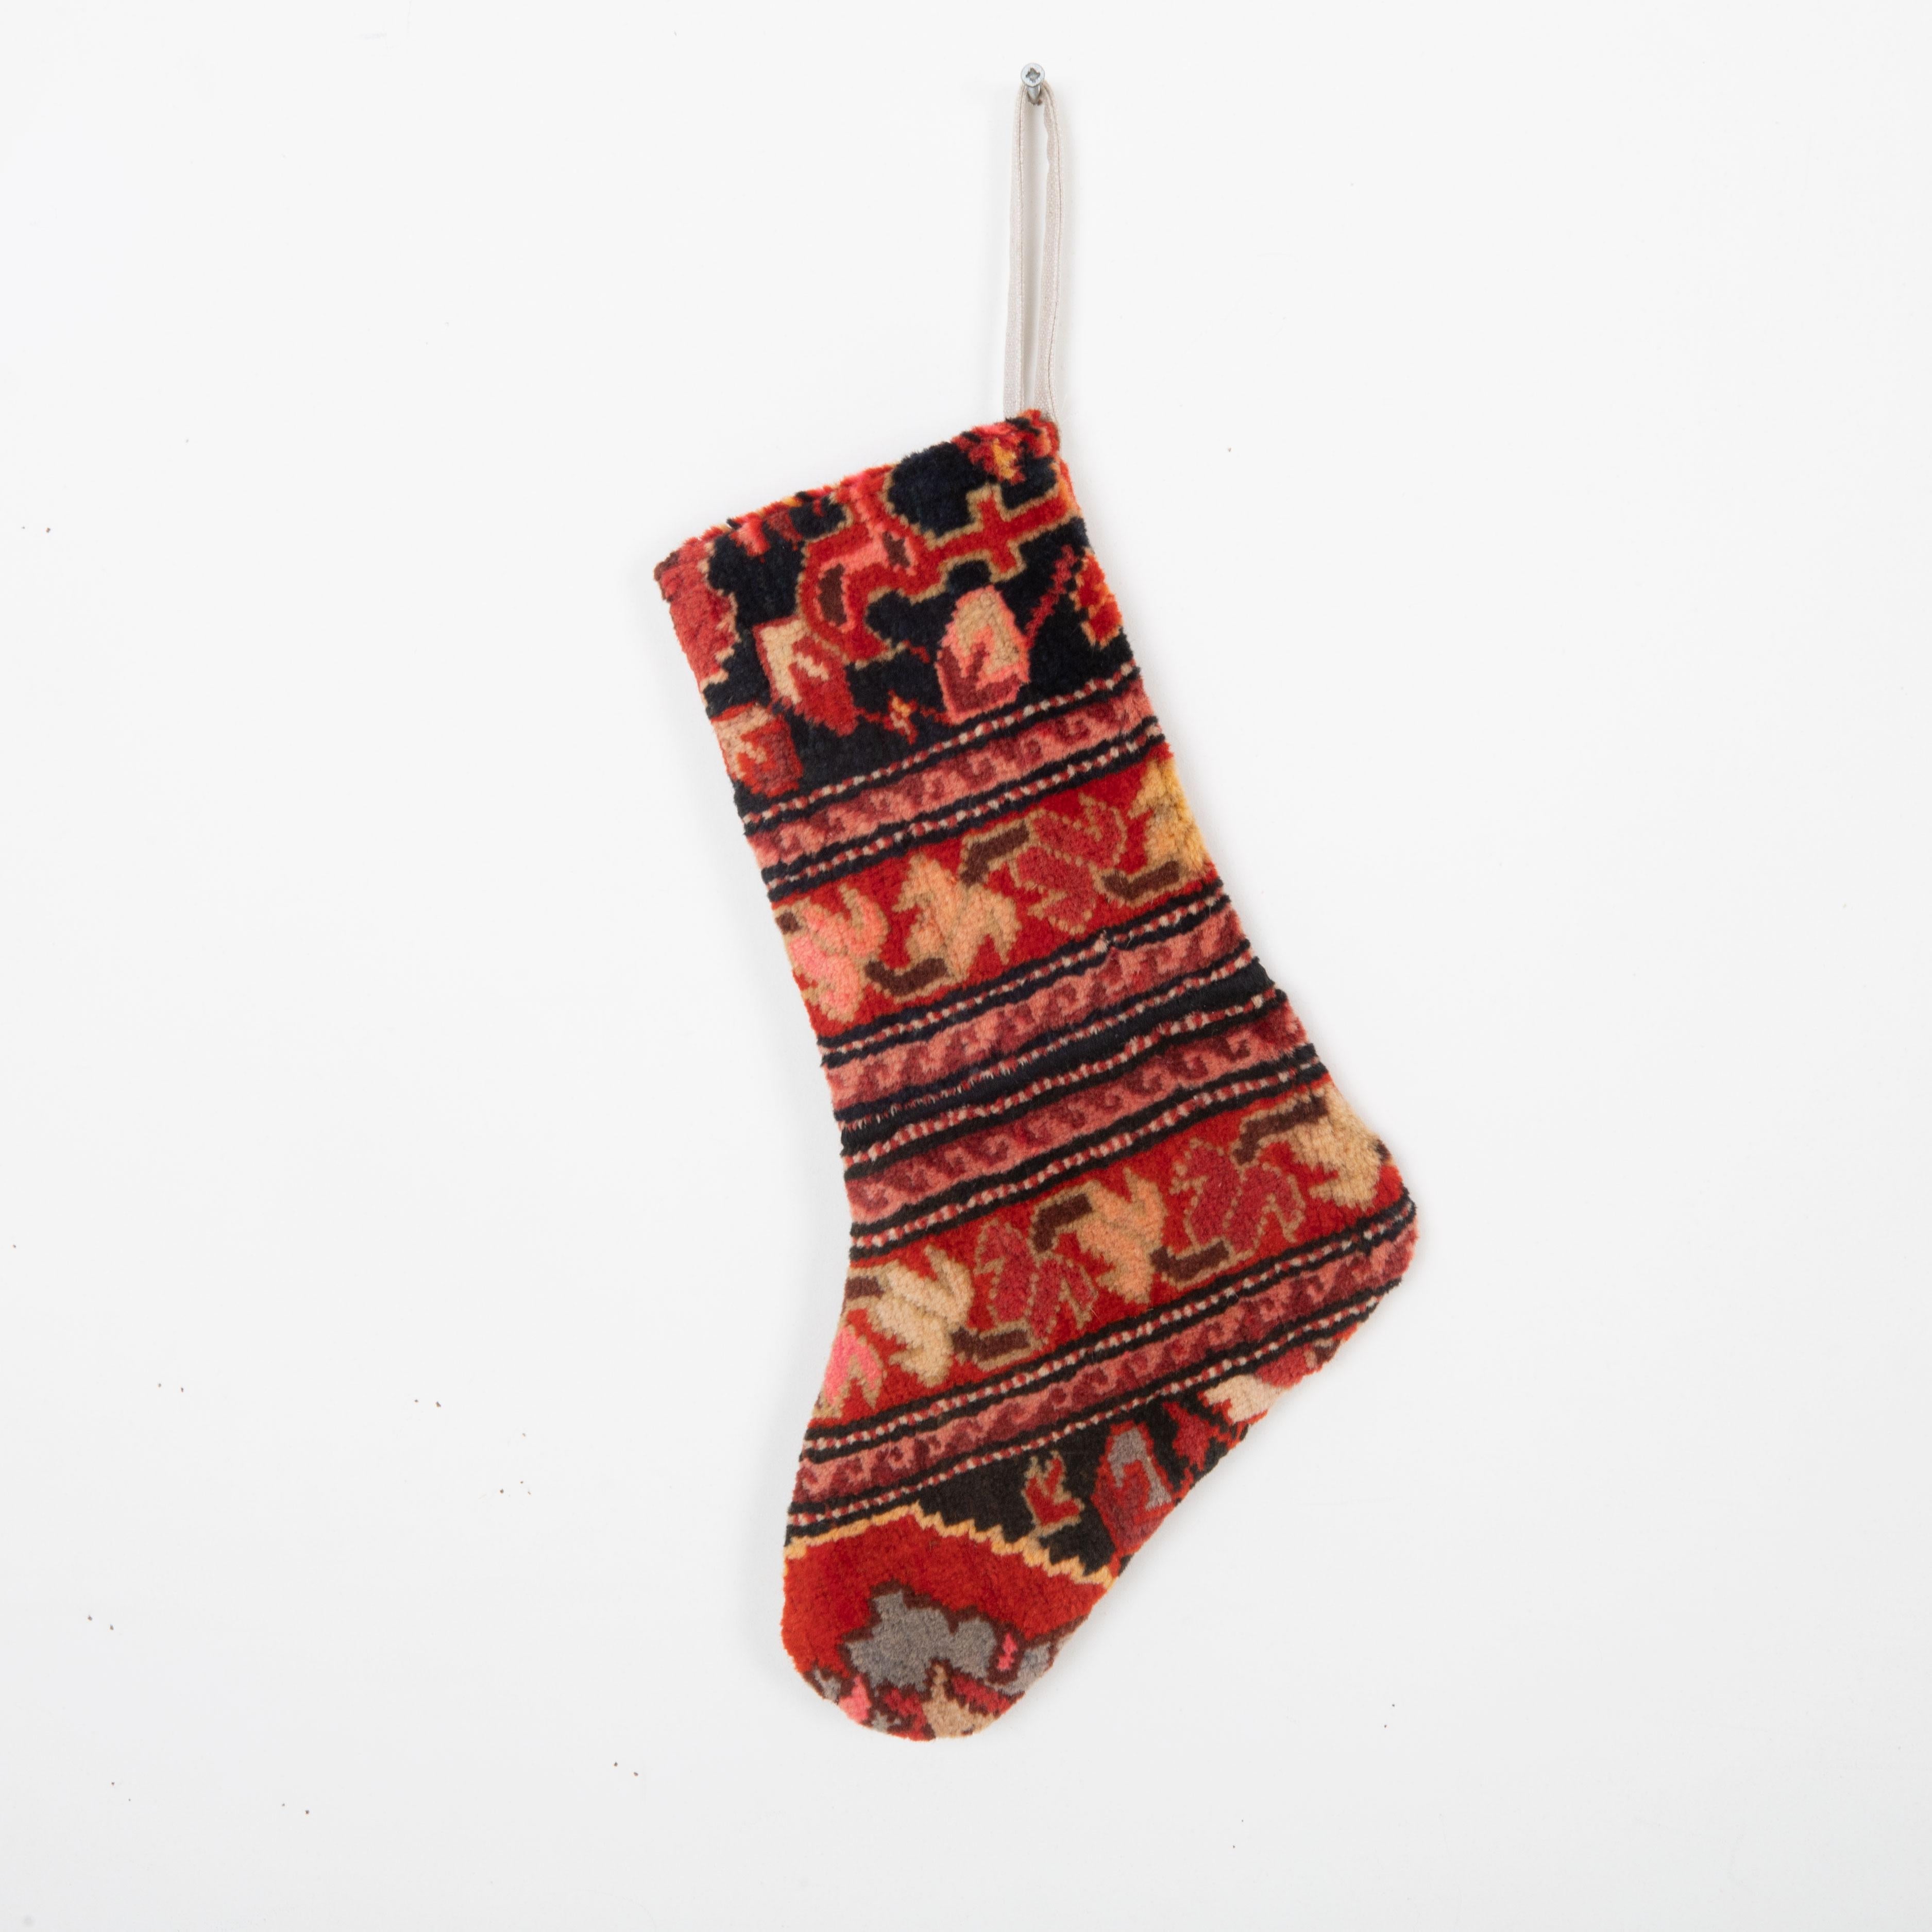 This Christmas Stocking was made from a late 19th or Early 20th C. Caucasıan rug fragments.
Linen in the back.

Please note, this stocking was made from caucasian rug fragments.
